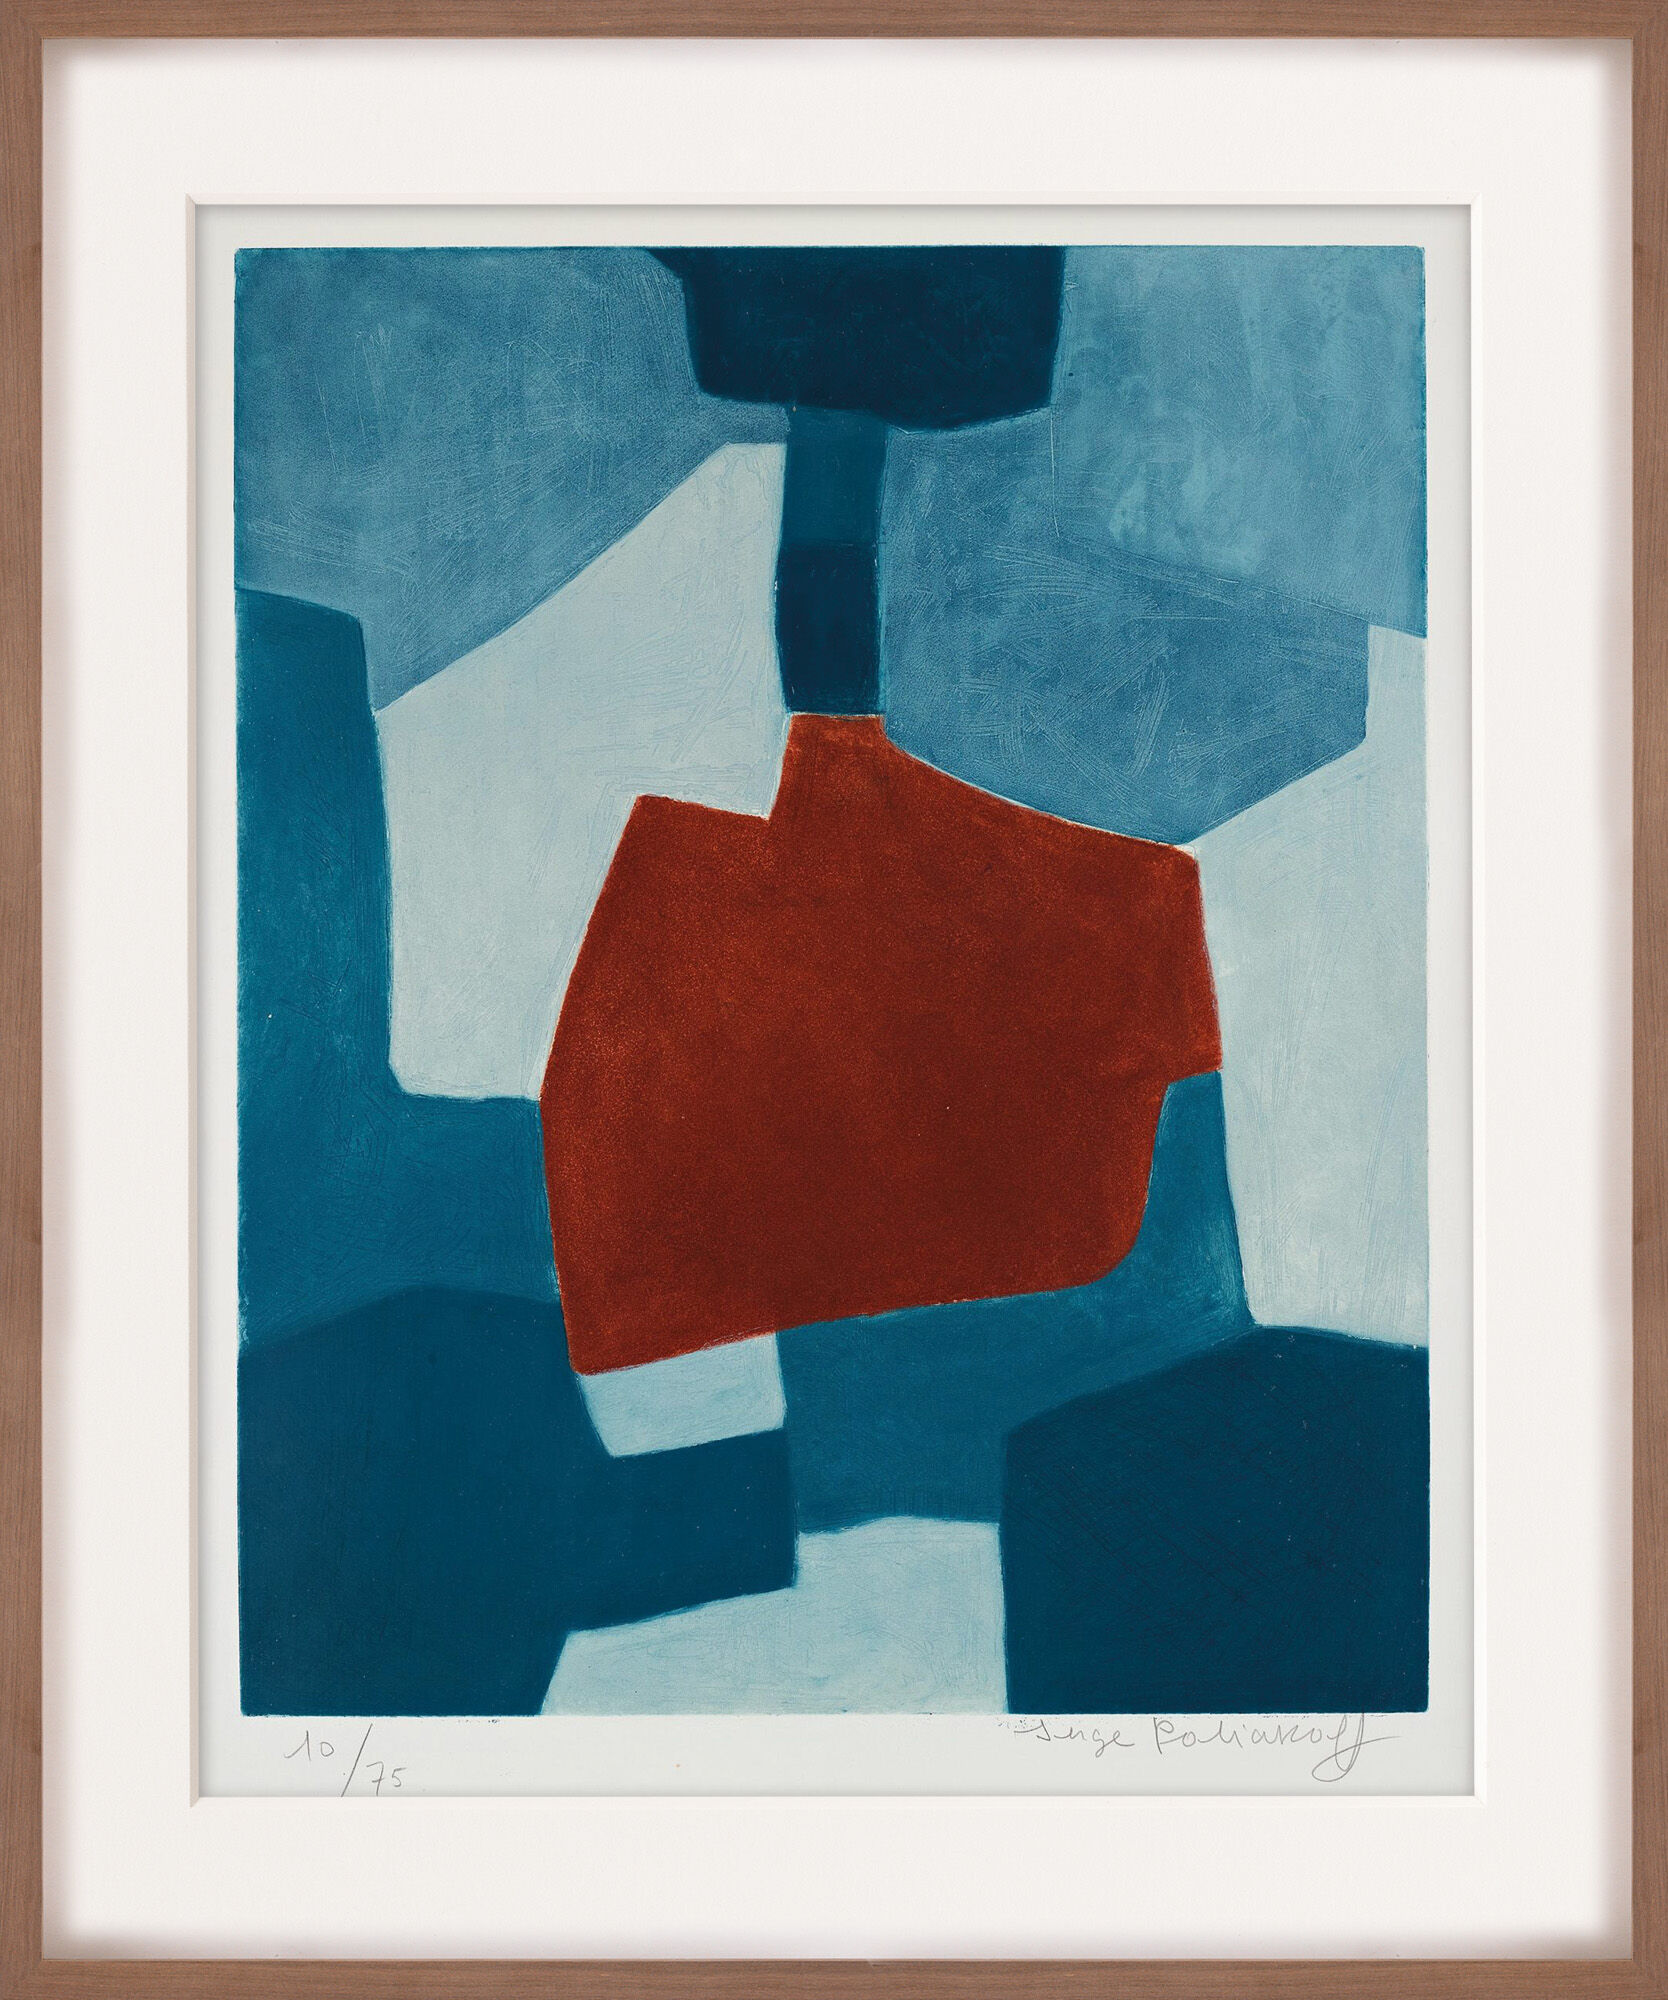 Picture "Composition bleue et rouge" (1967) by Serge Poliakoff